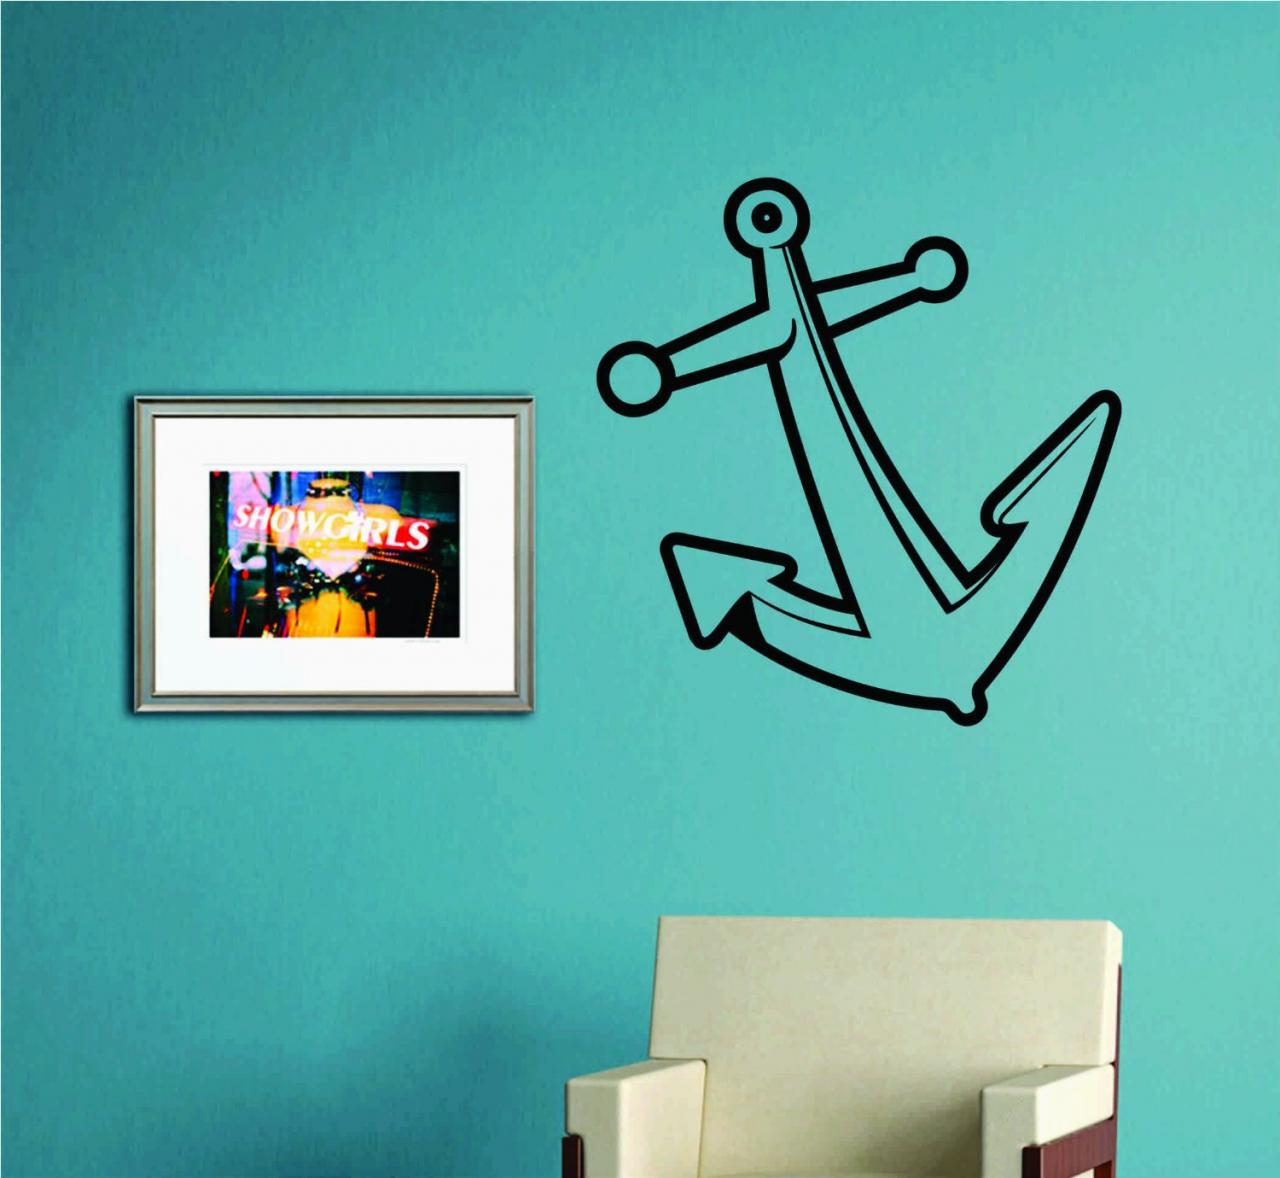 Anchor Version 101 Wall Decal Sticker Family Art Graphic Home Decor Mural Decal Sticker Famous Quotes Wall Mural